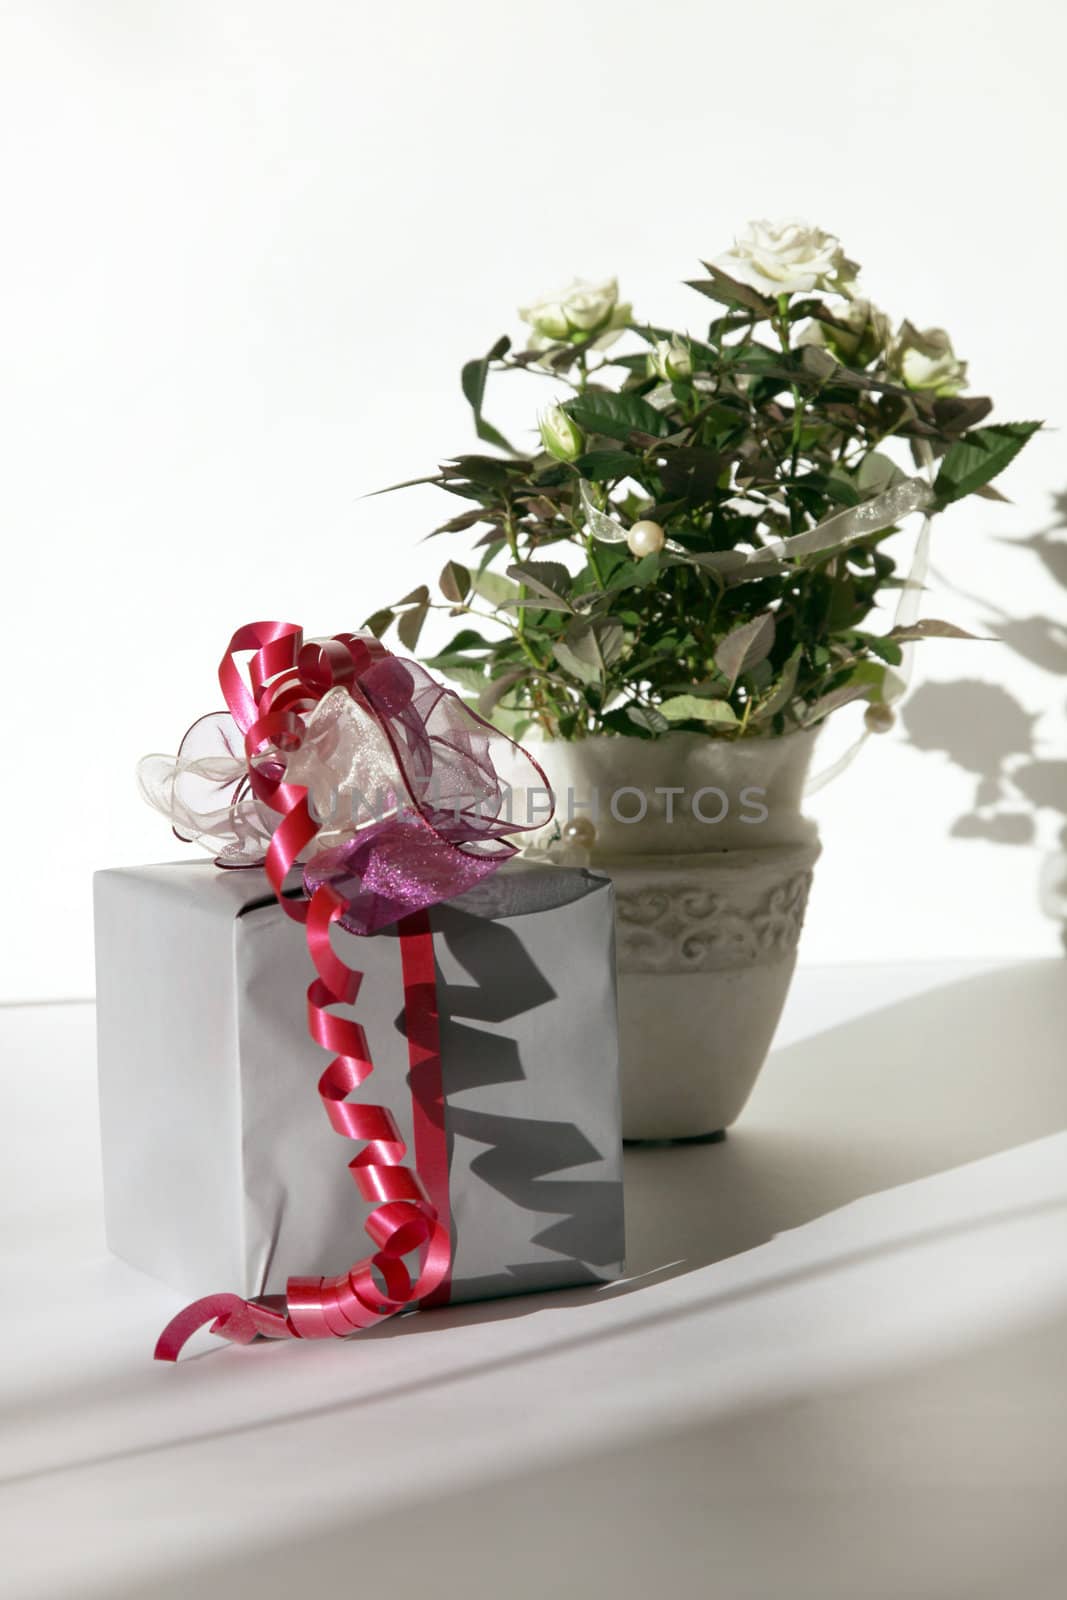 pretty wrapped gift with roses in the background  by Farina6000